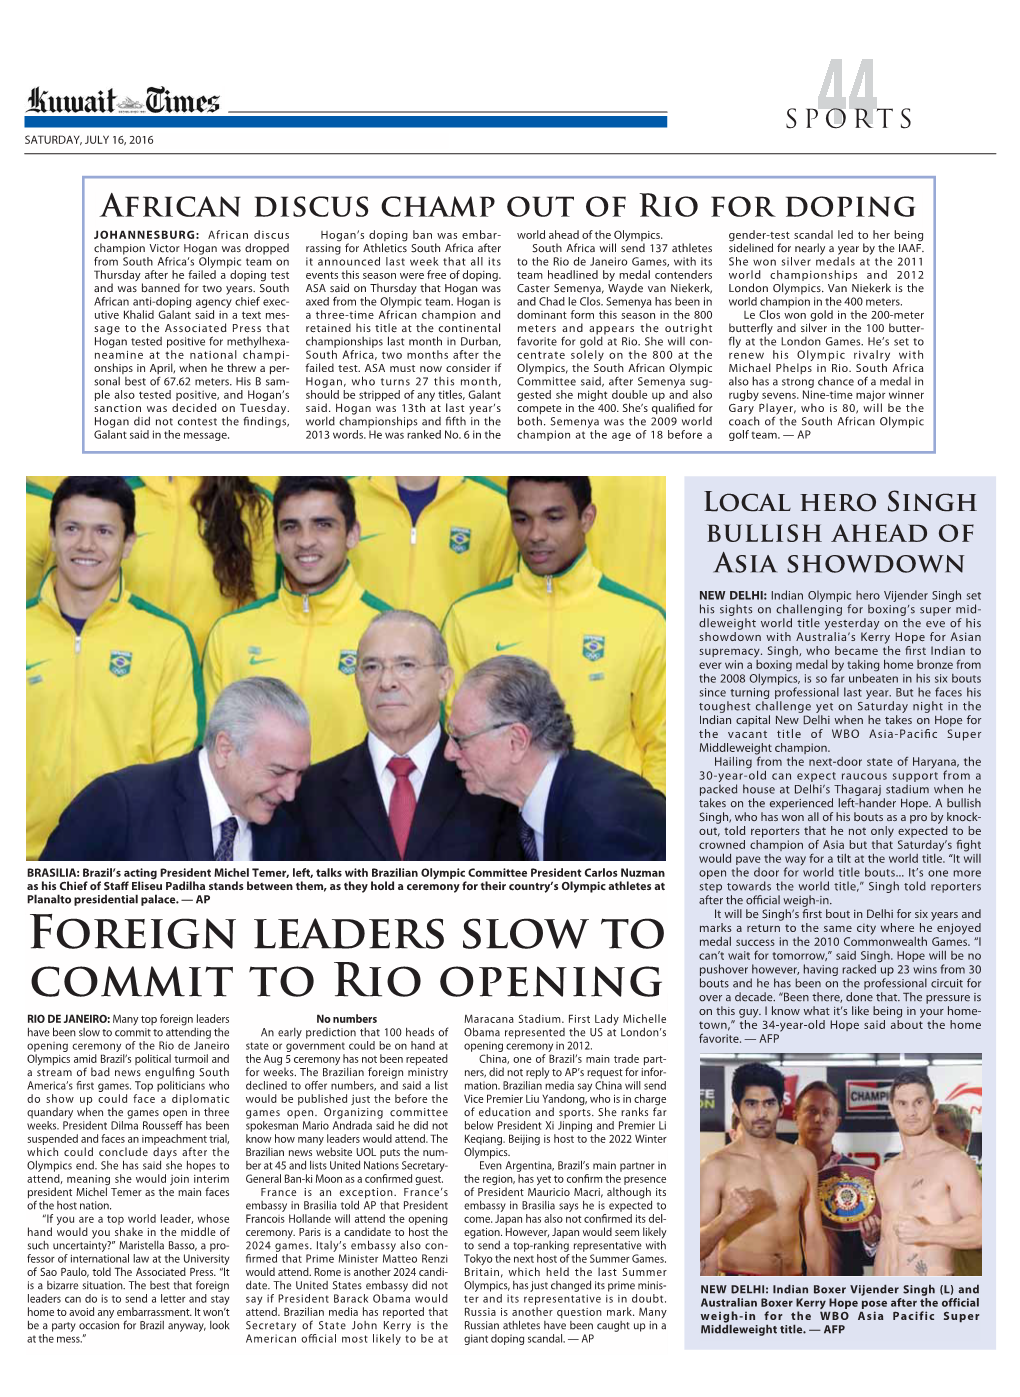 Foreign Leaders Slow to Commit to Rio Opening